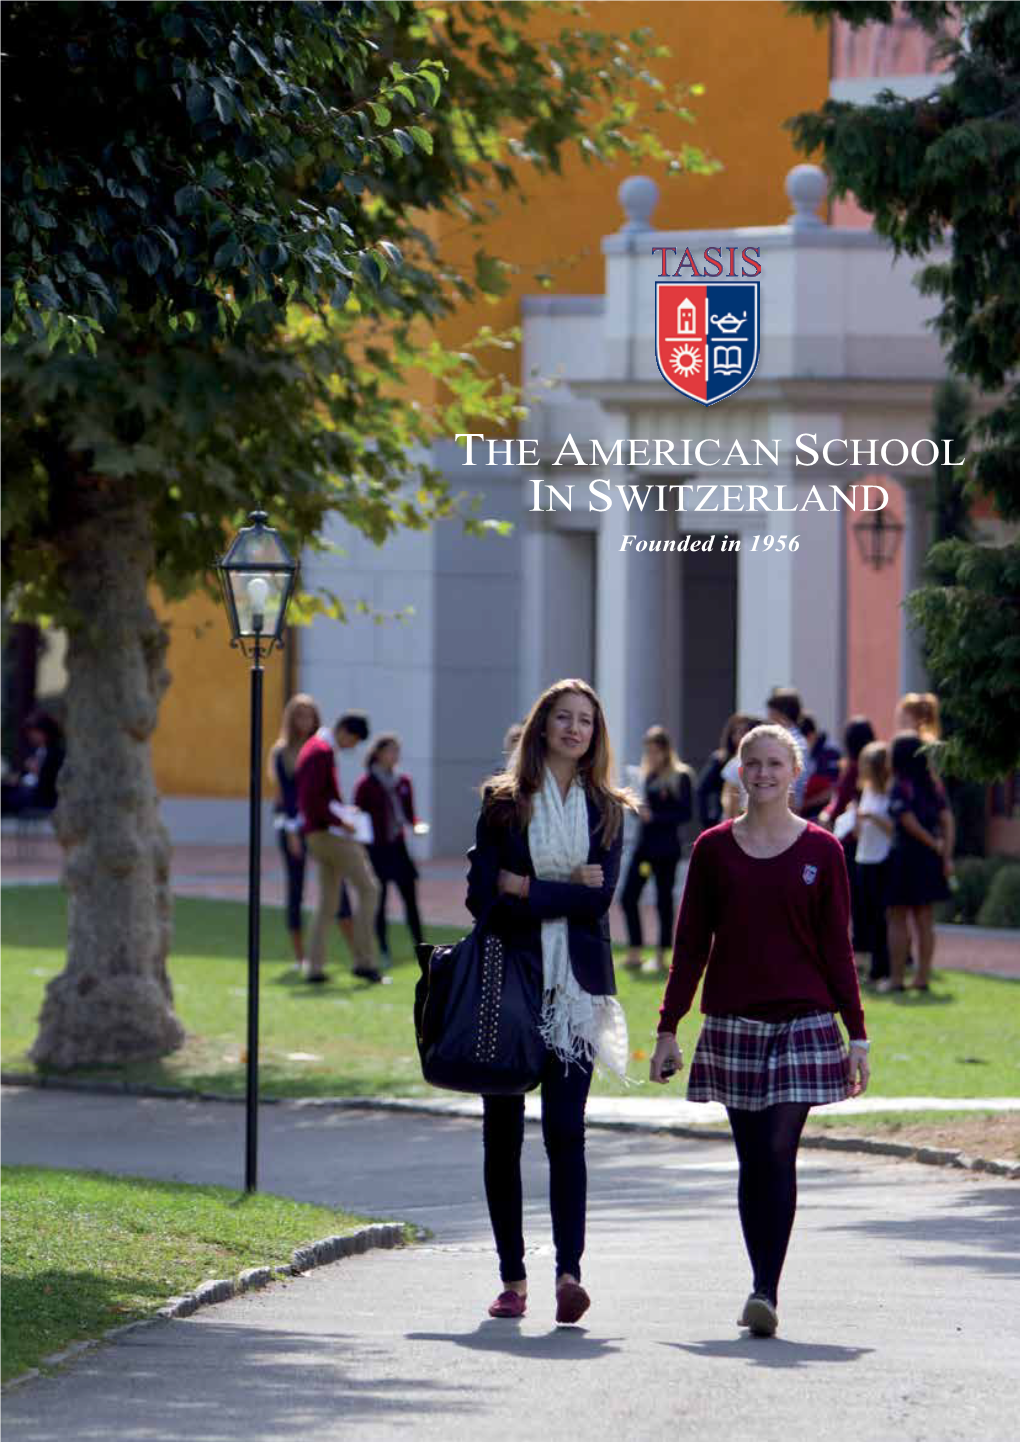 THE AMERICAN SCHOOL in SWITZERLAND Founded in 1956 the AMERICAN SCHOOL in SWITZERLAND Founded in 1956